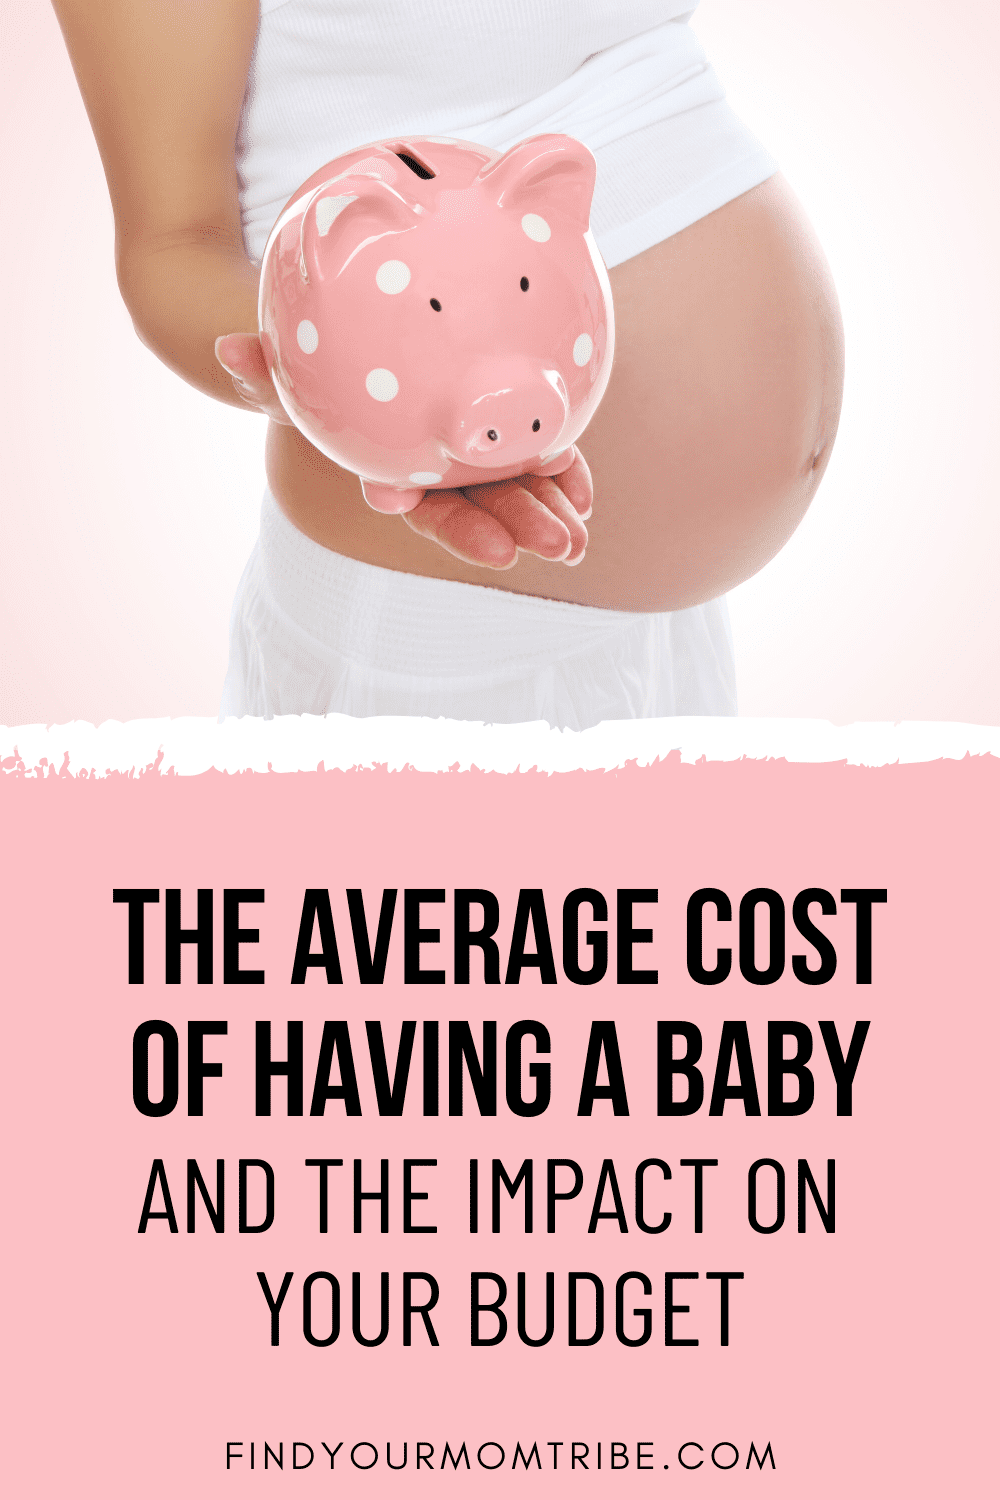 Pinterest average cost of having a baby